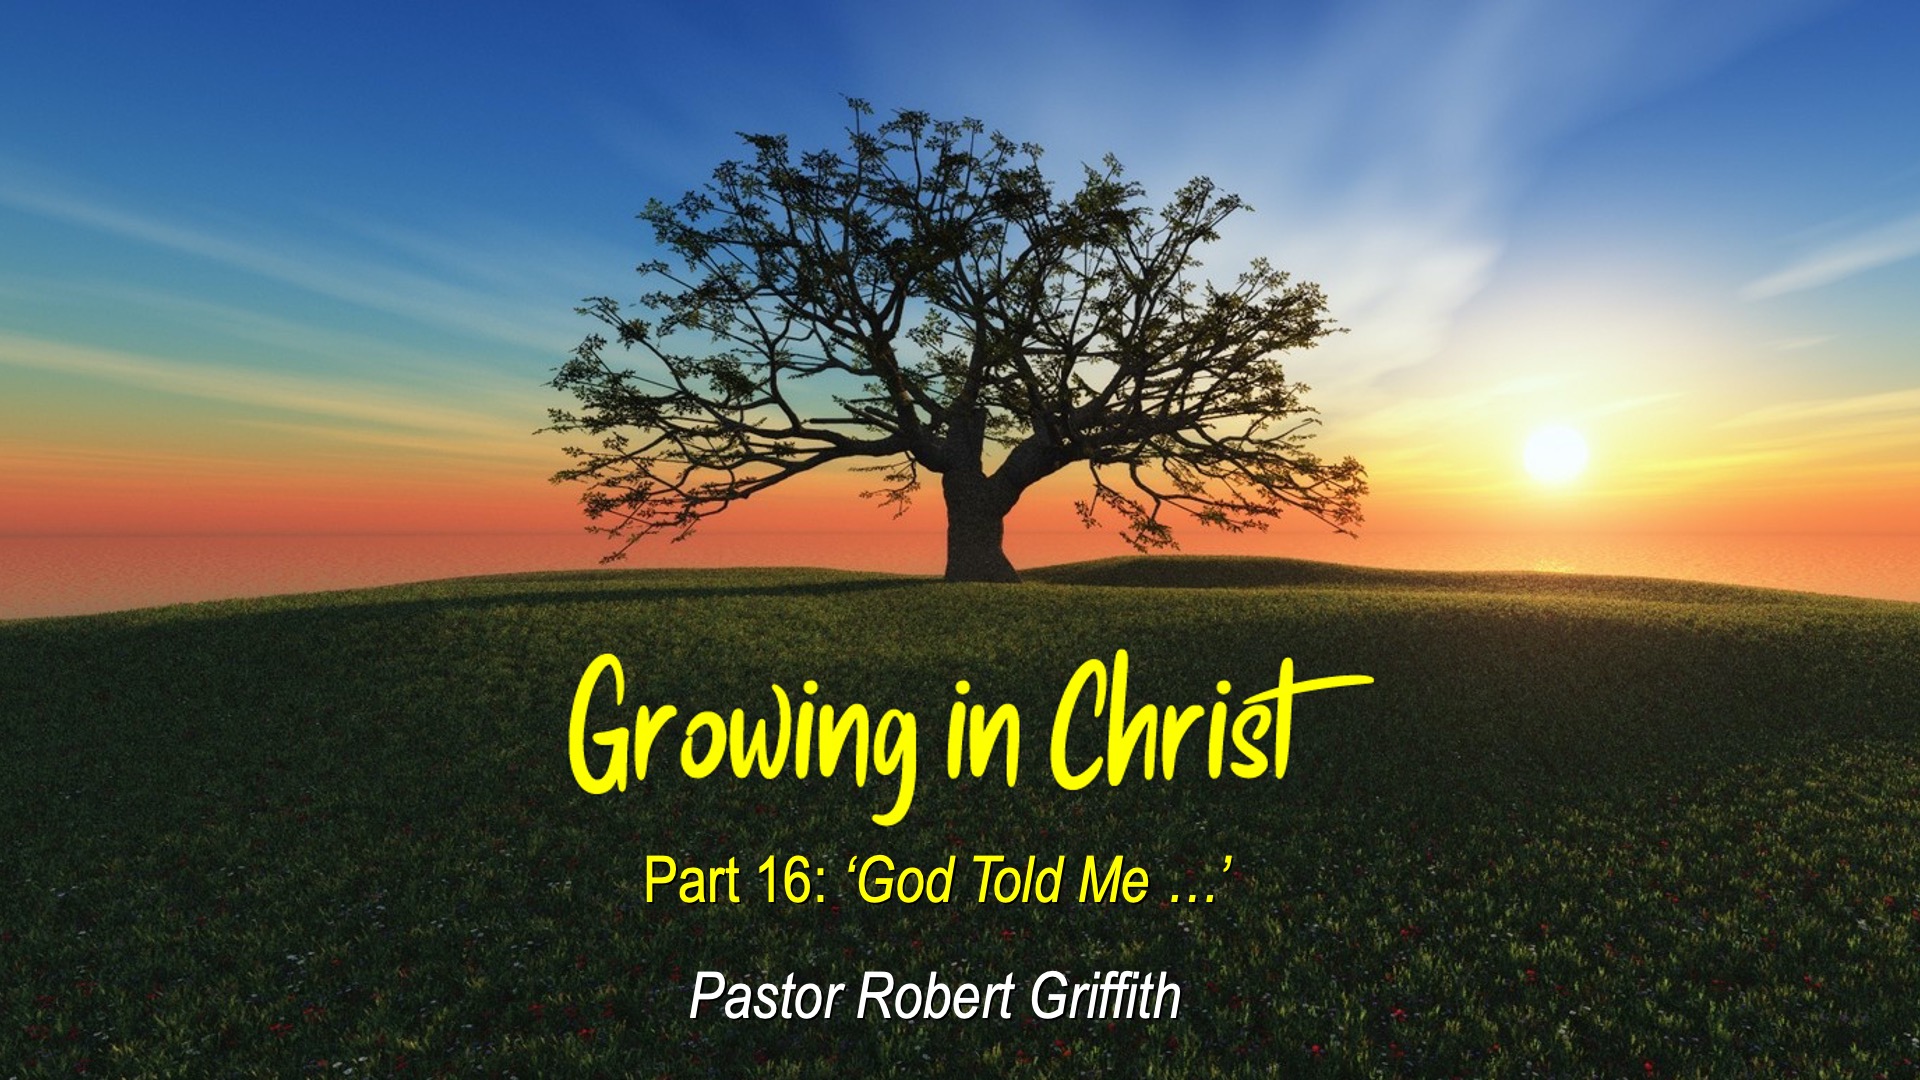 Growing in Christ (16)‘God told me…’